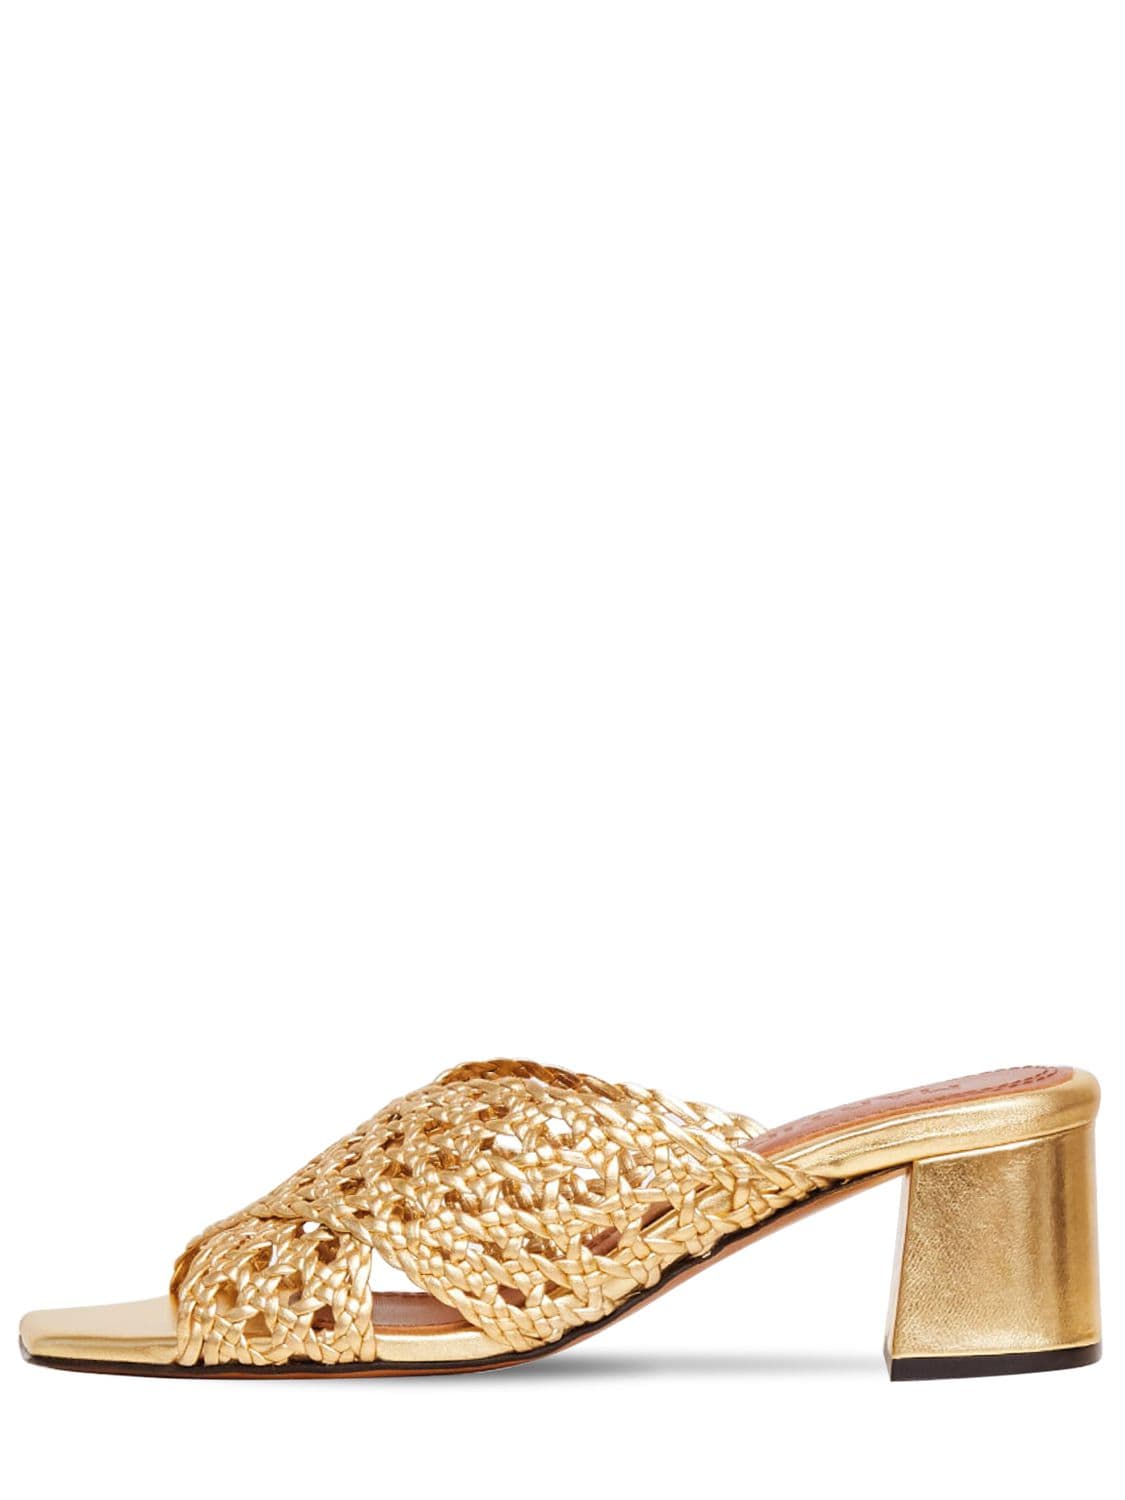 Souliers Martinez 50mm Woven Metallic Leather Mules In Gold